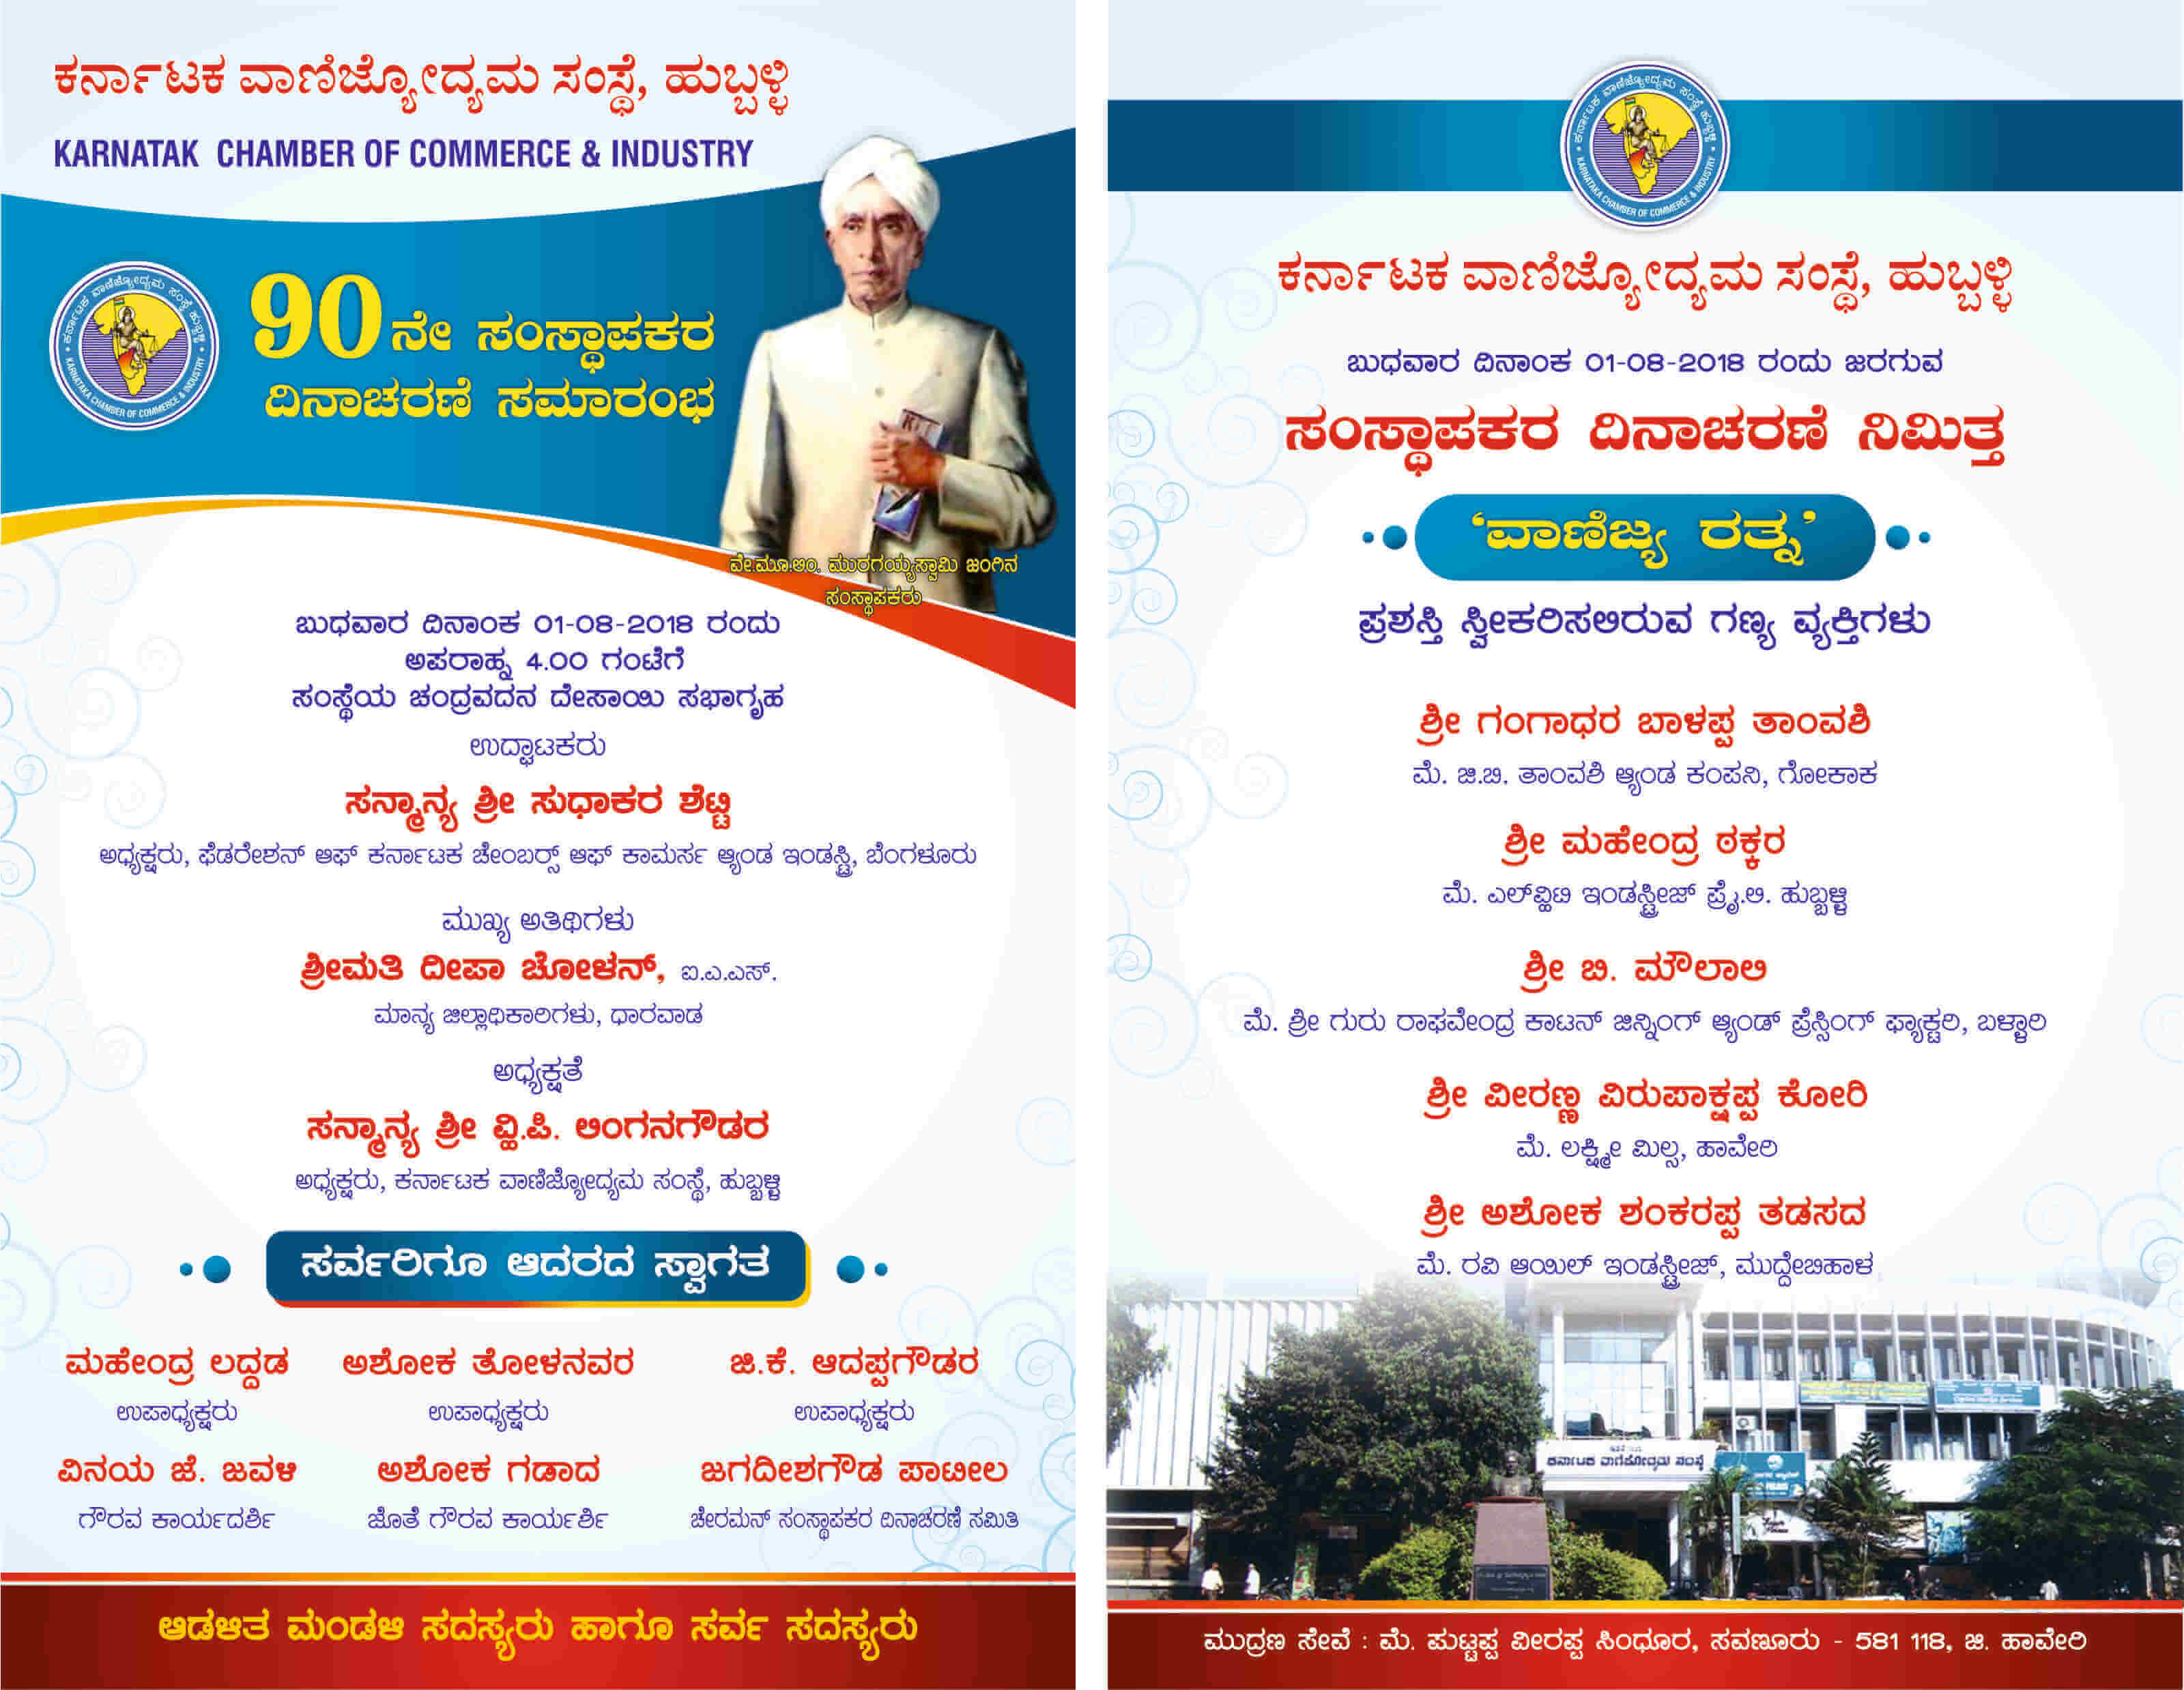 kcci-founders-day-invitation-2018